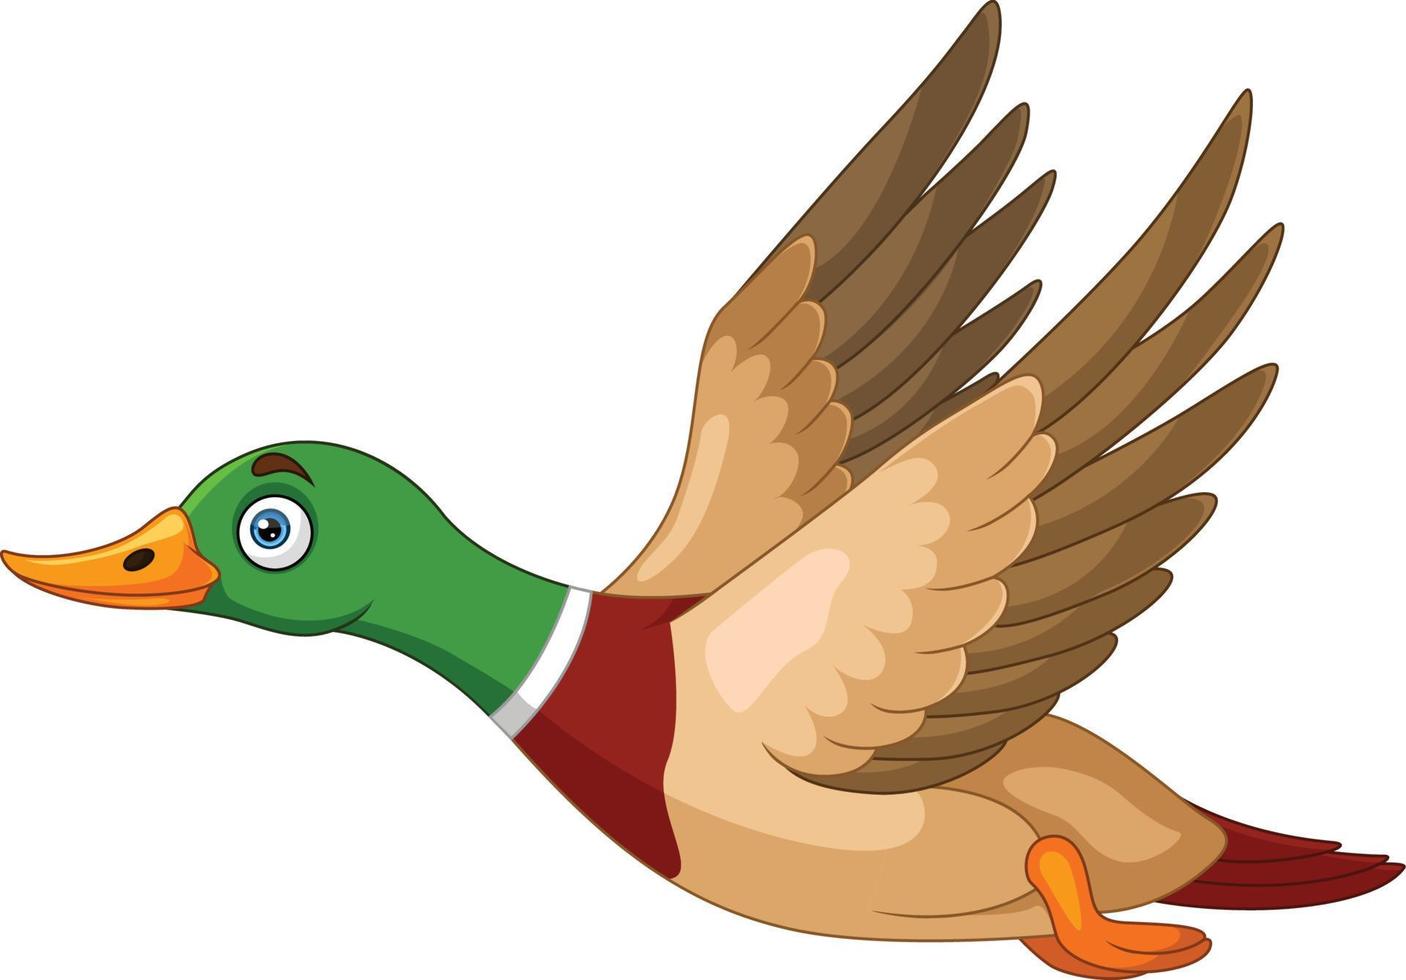 Cute duck cartoon flying on white background vector